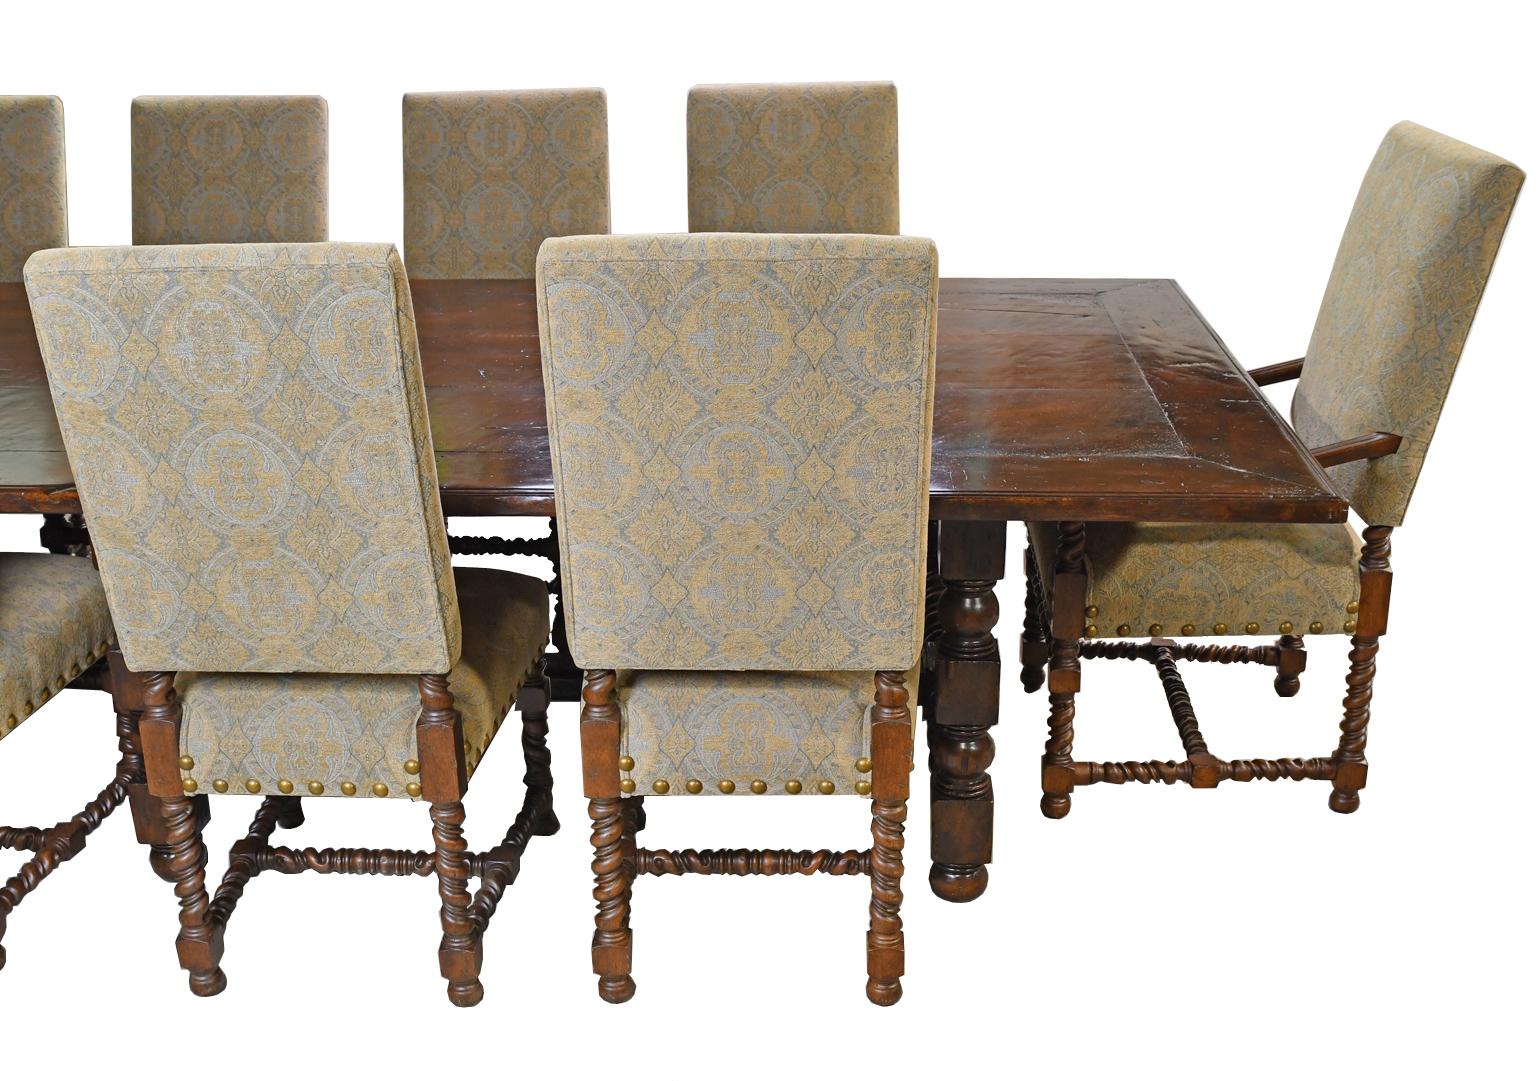 Dining Set with 12' Long Mahogany Table & 10 Upholstered Chairs with Turned Legs 6